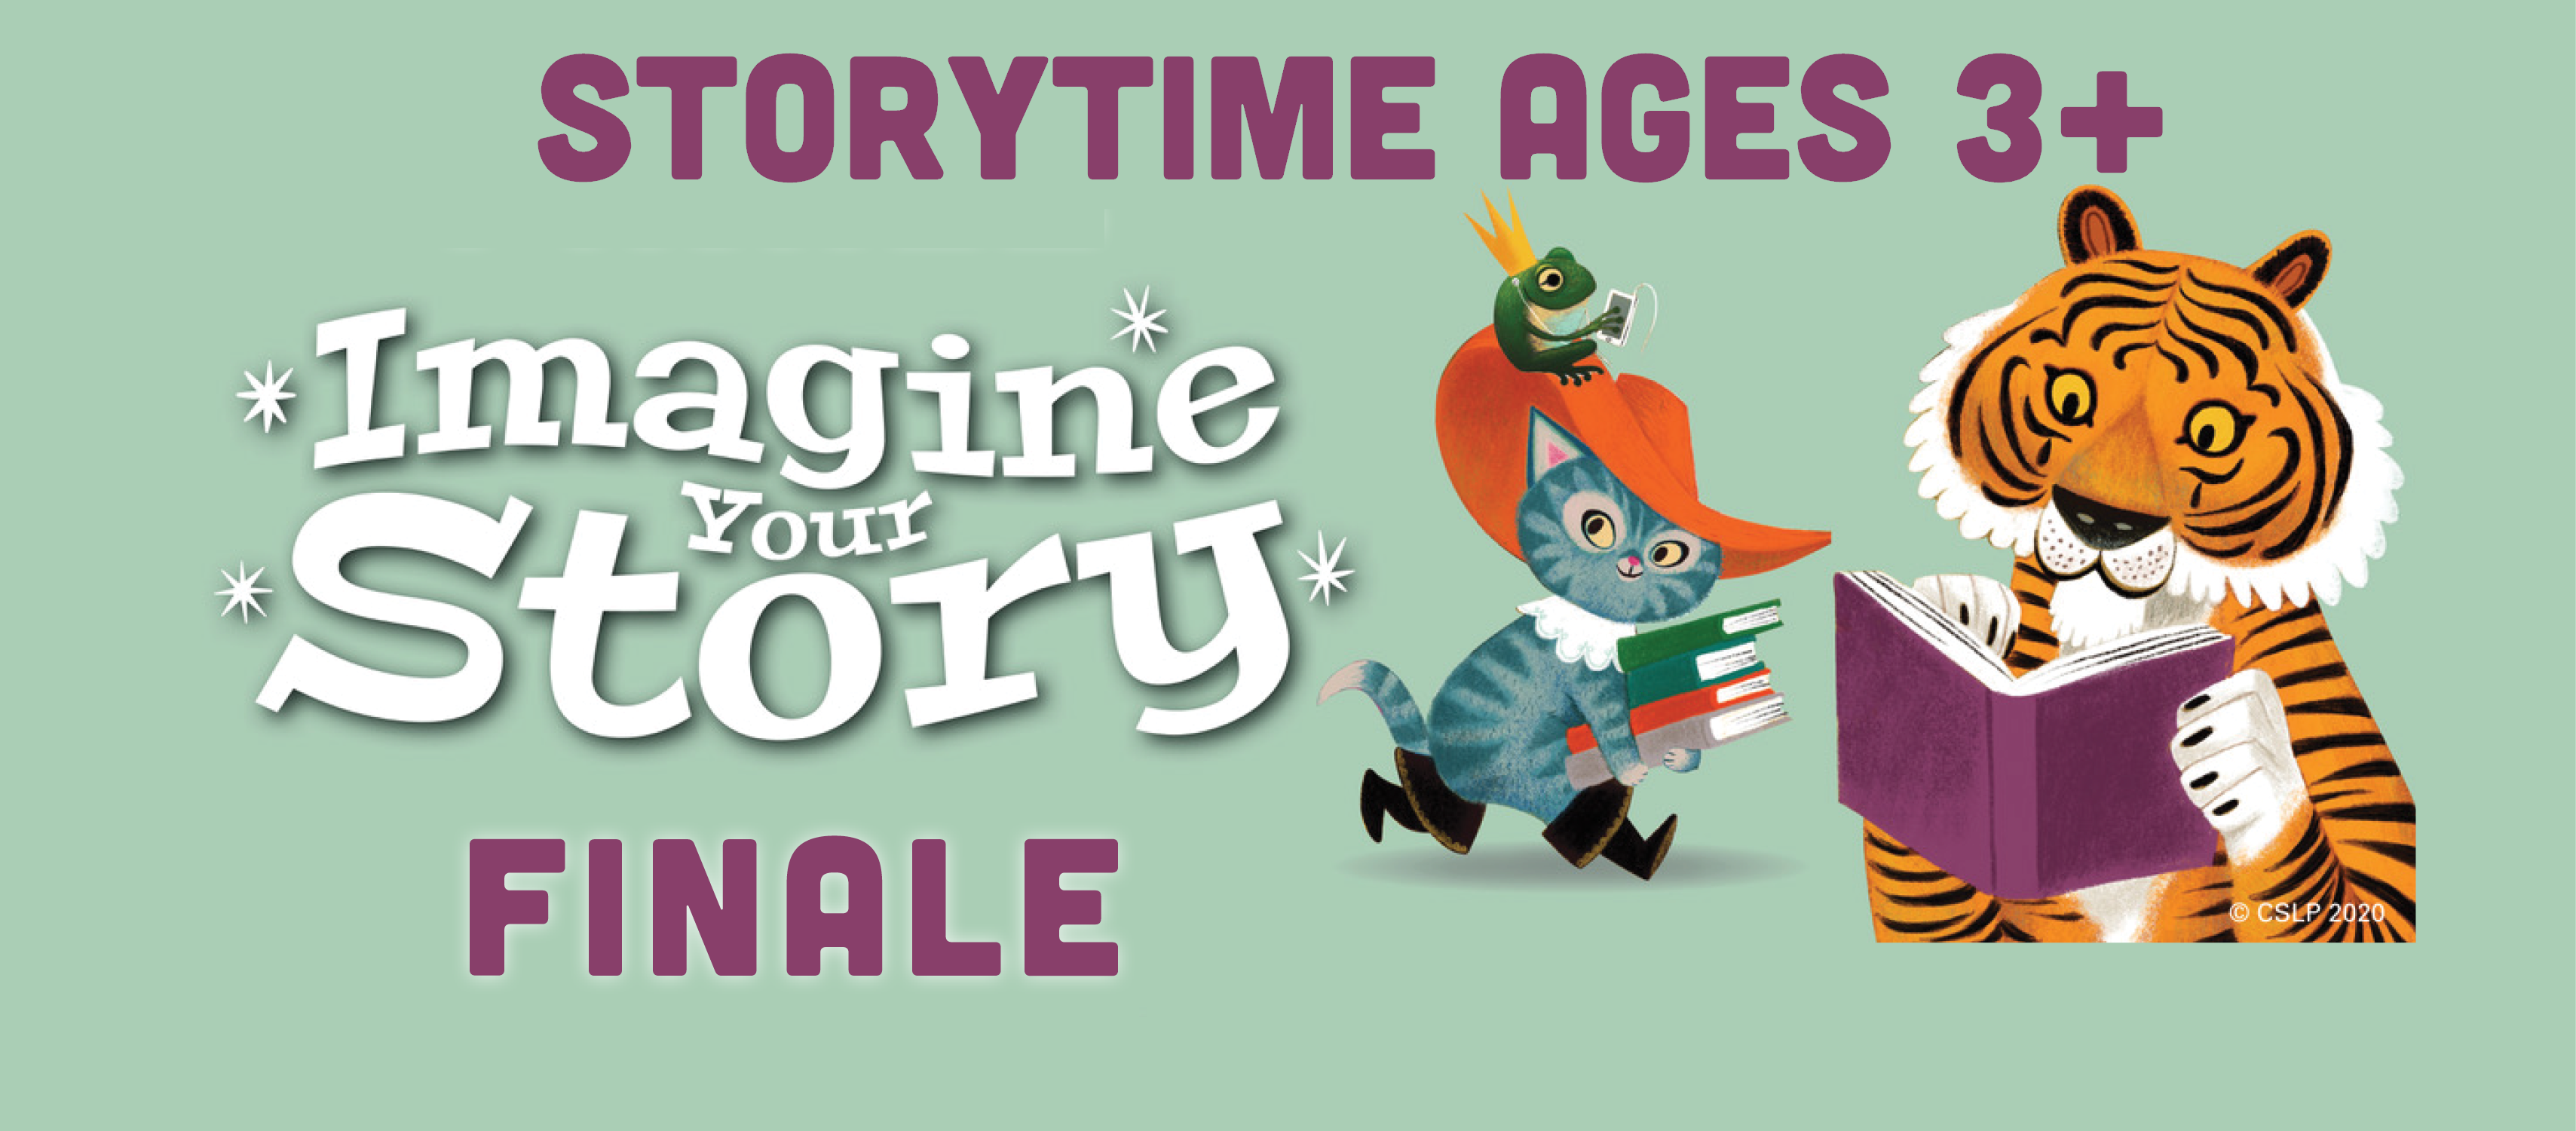 Storytime Ages 3 + Imagine Your Story Finale. Puss and Boots and tiger reading graphic. 